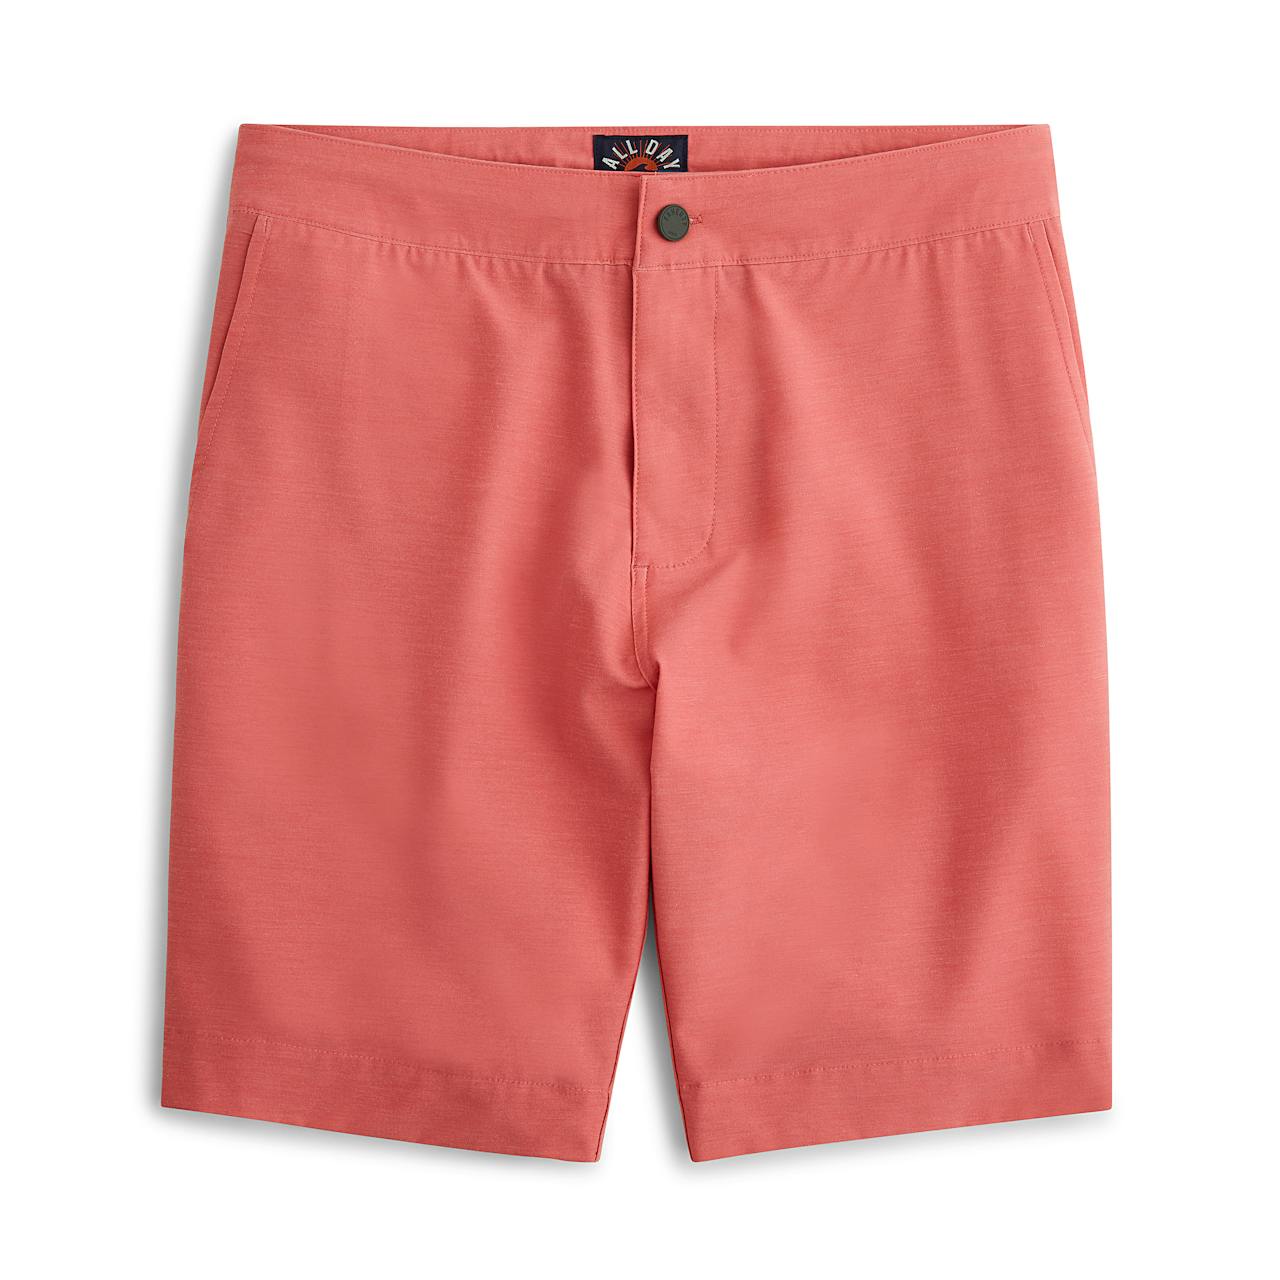 Faherty Brand All Day Short -9"